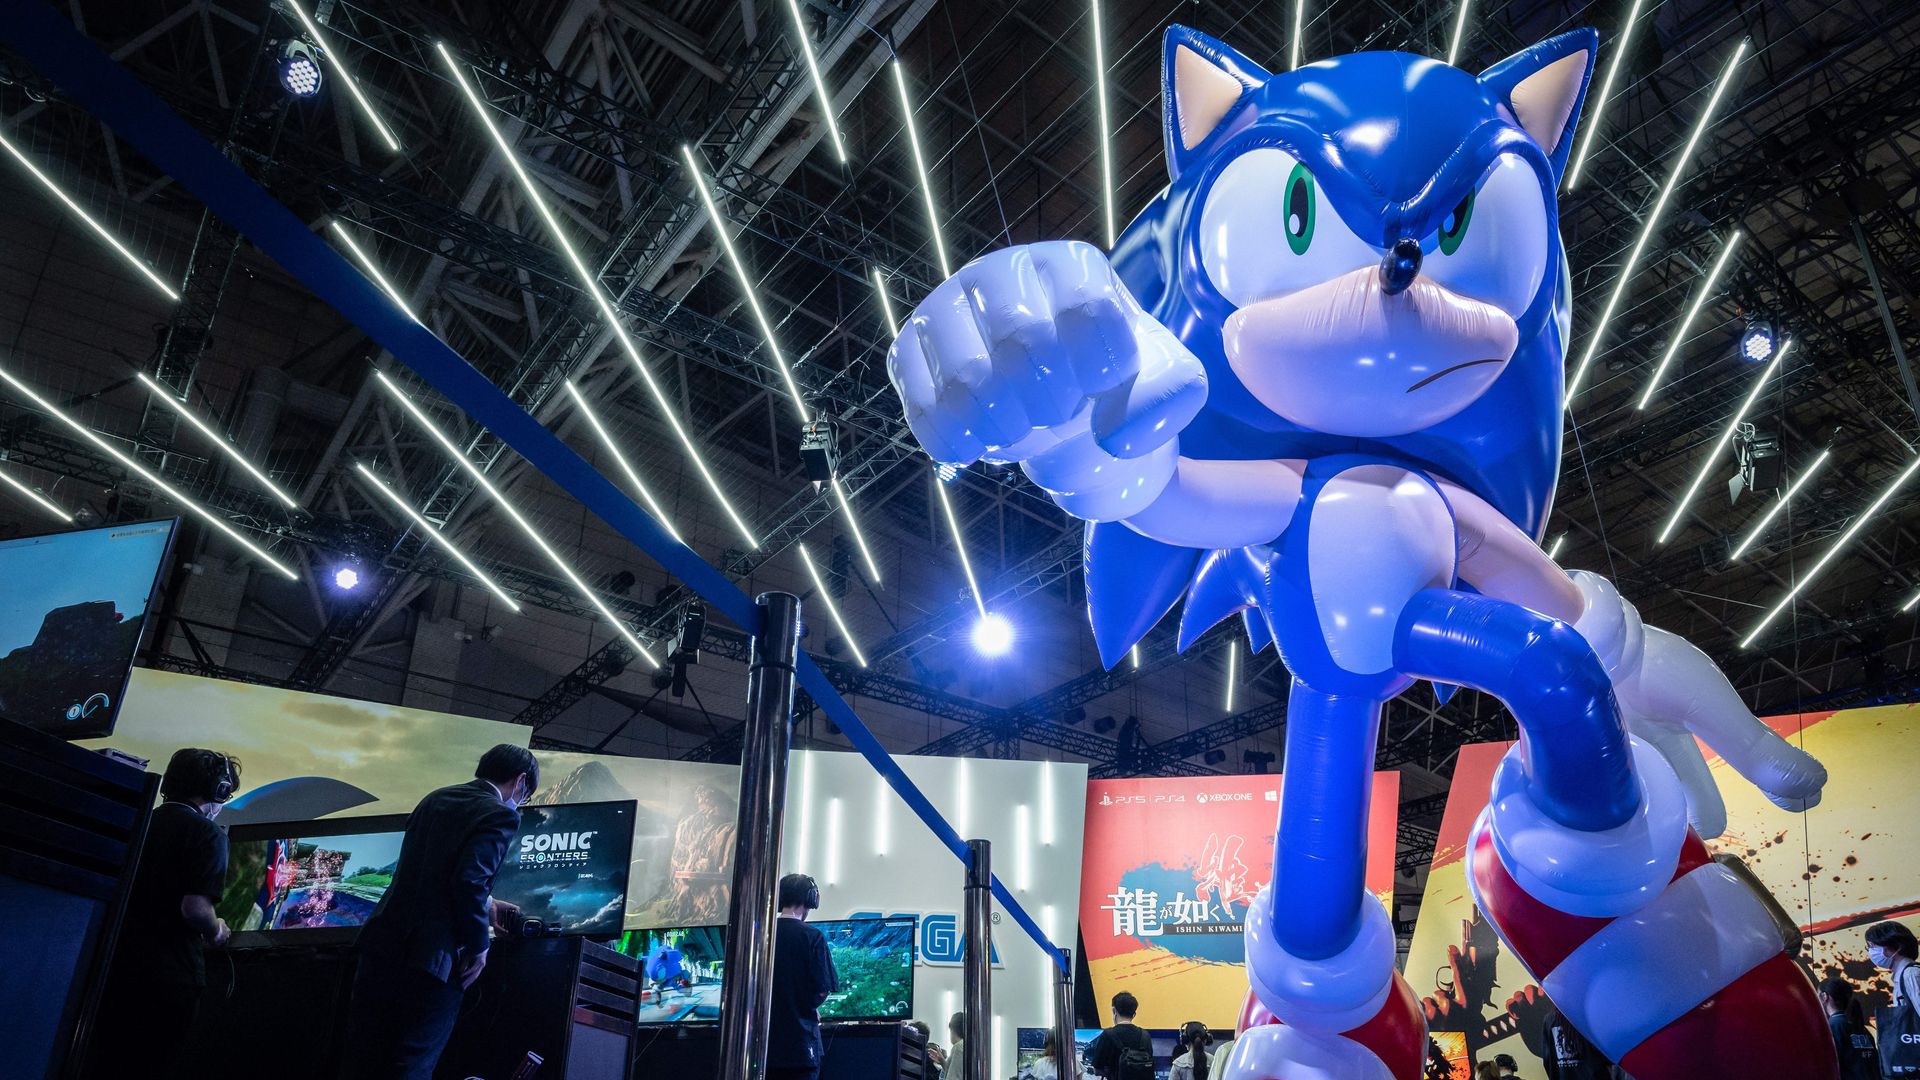 Photo of a large Sonic the Hedgehog balloon at a gaming convention